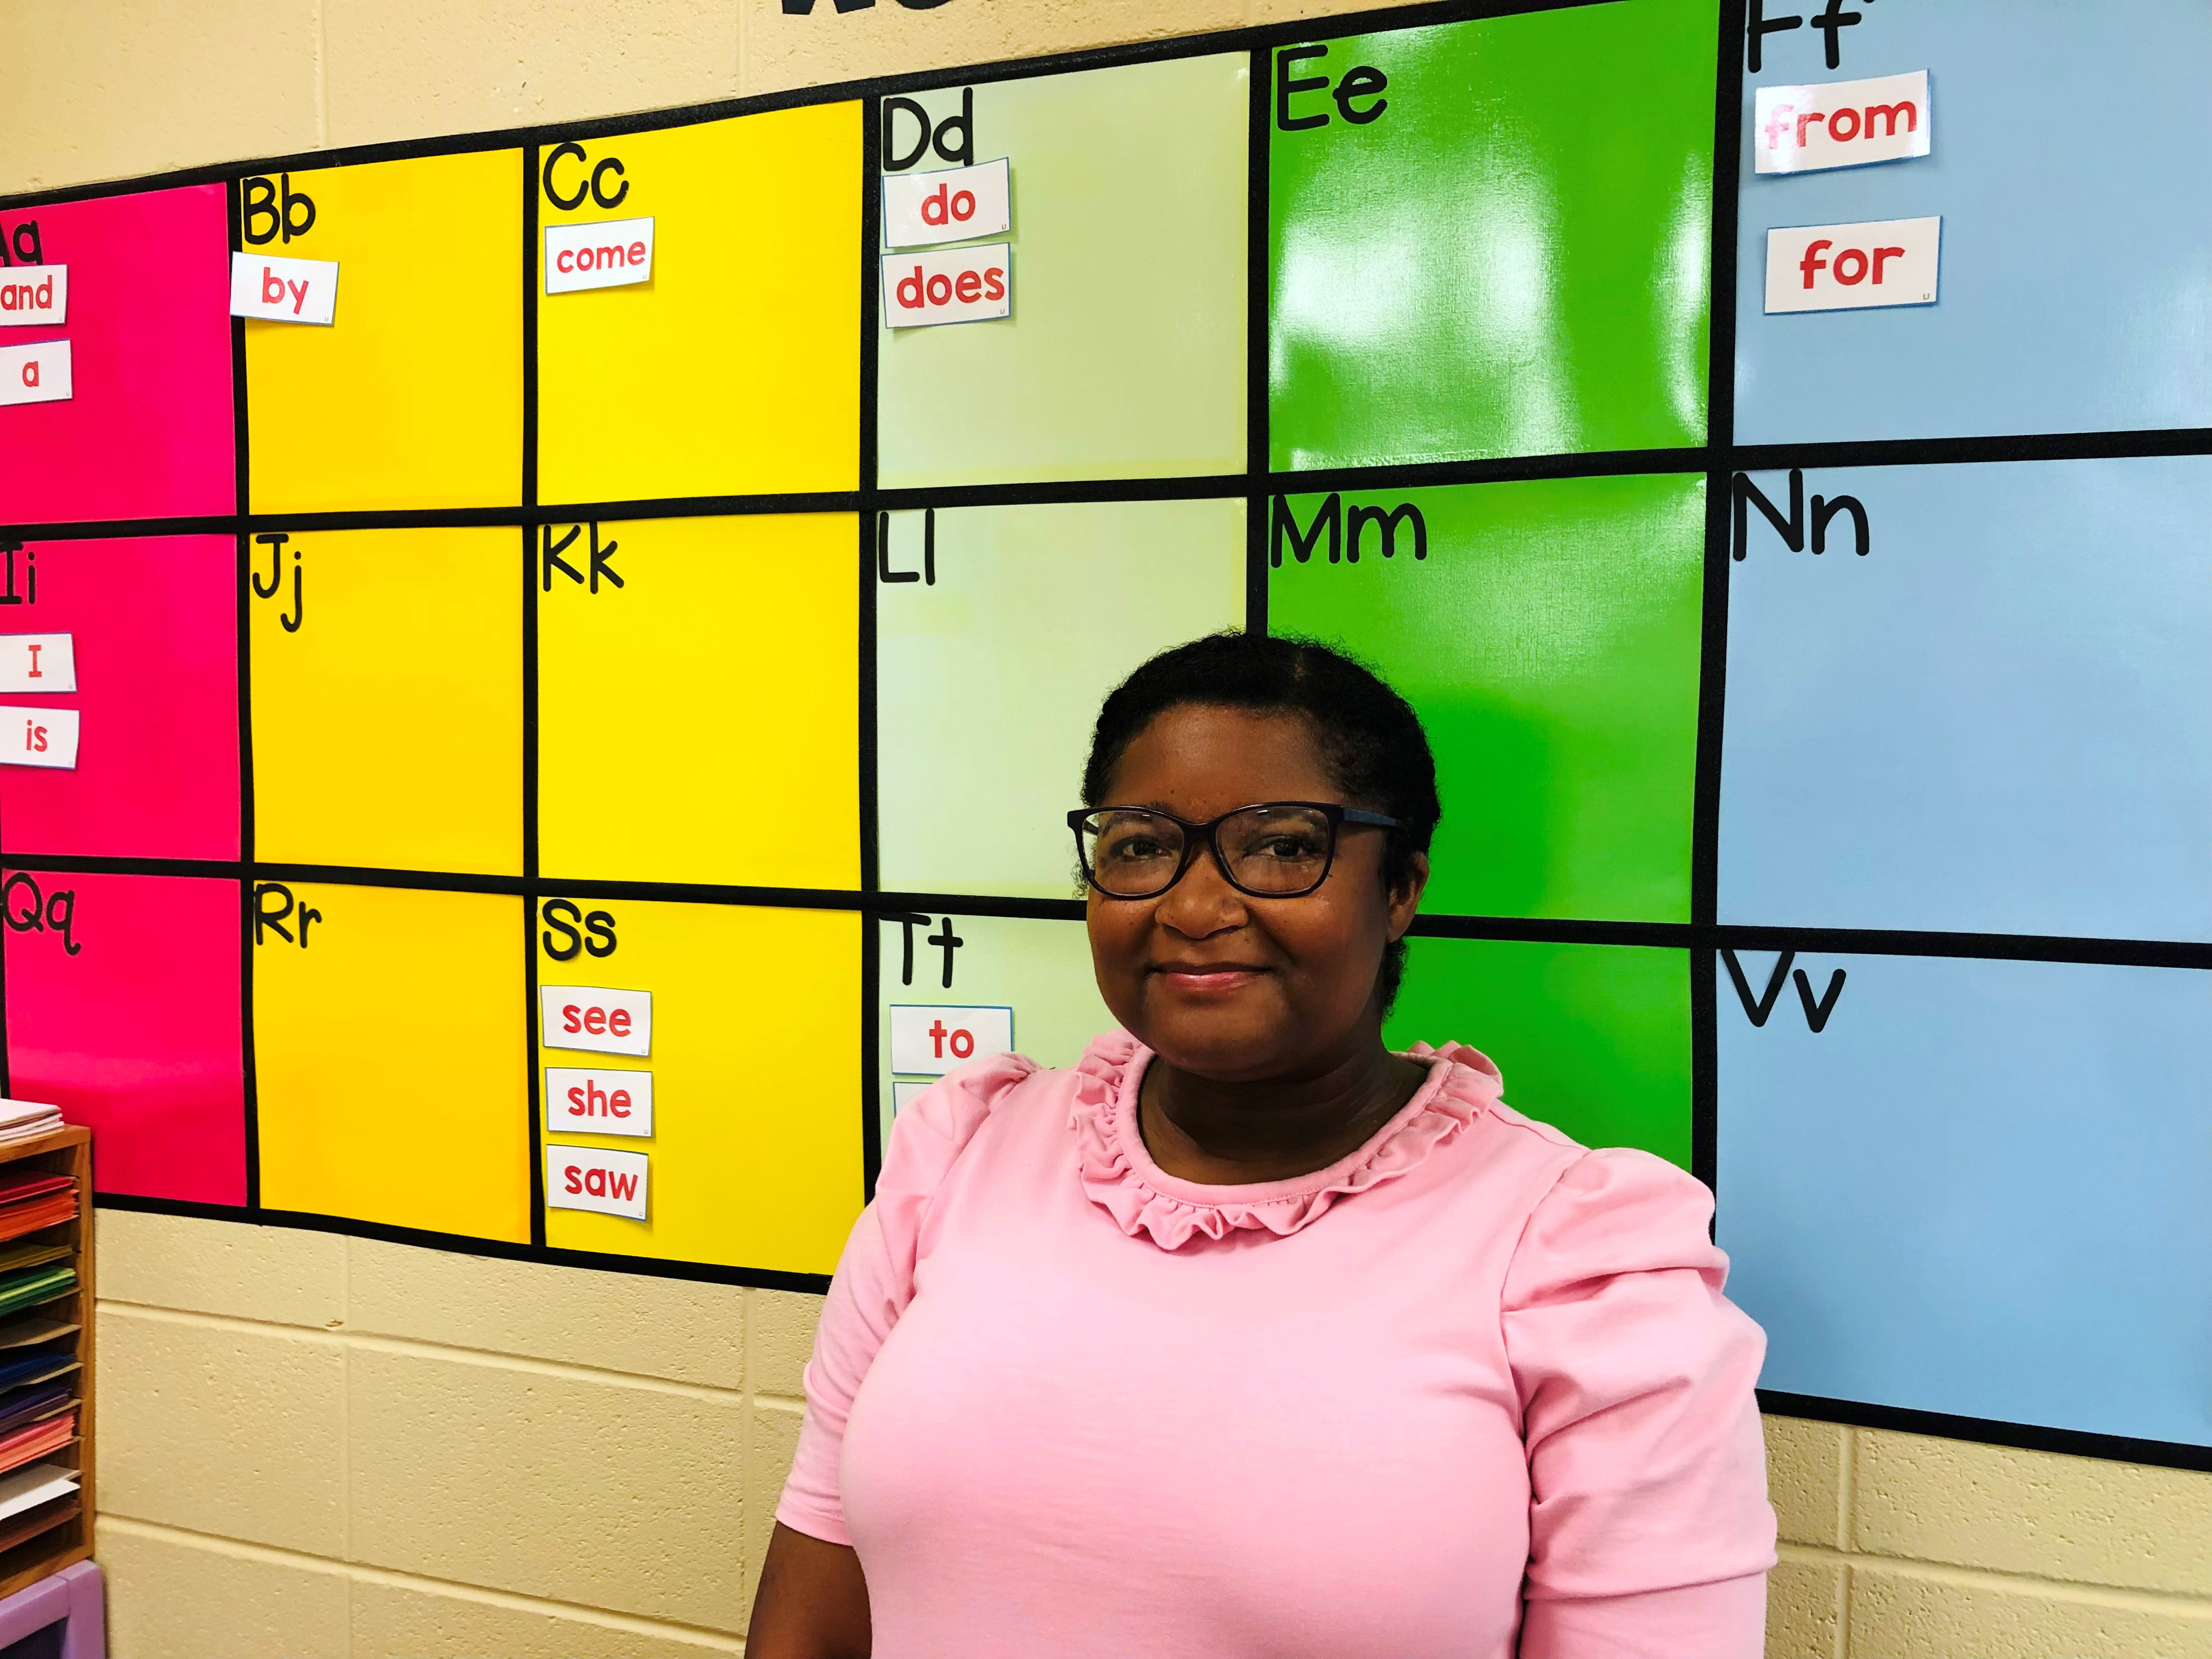 African American woman in pink top in front of bulletin board in classroom